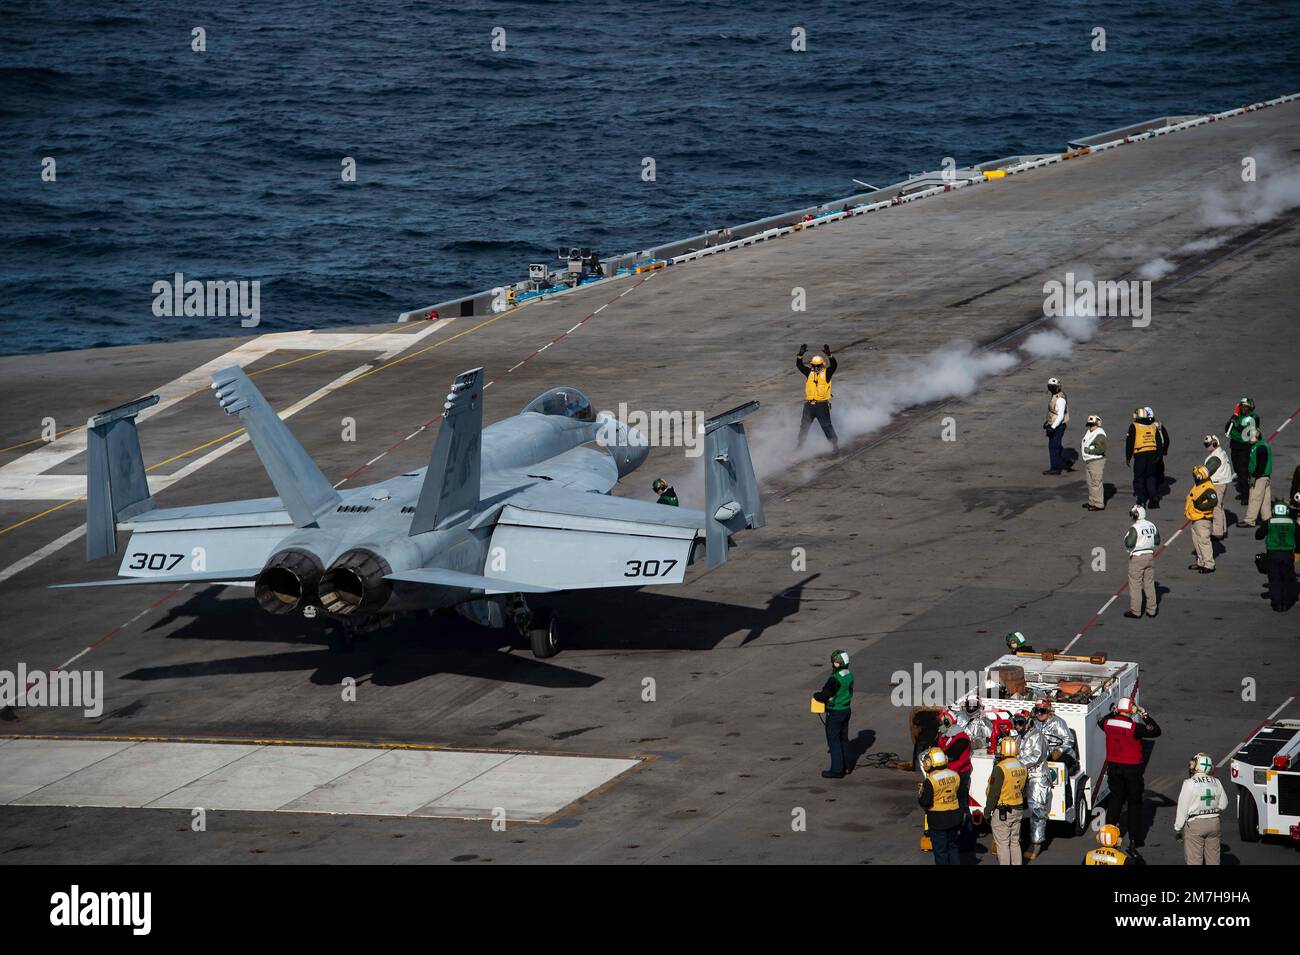 Pacific Ocean, United States. 01 January, 2023. A U.S. Navy F/A-18E Super Hornet fighter jet, assigned to the Golden Dragons of Strike Fighter Squadron 192, prepares to launch off the flight deck of the Nimitz-class aircraft carrier USS Carl Vinson during routine operations, January 1, 2023 in the Pacific Ocean.  Credit: MC3 Larissa Dougherty/Planetpix/Alamy Live News Stock Photo